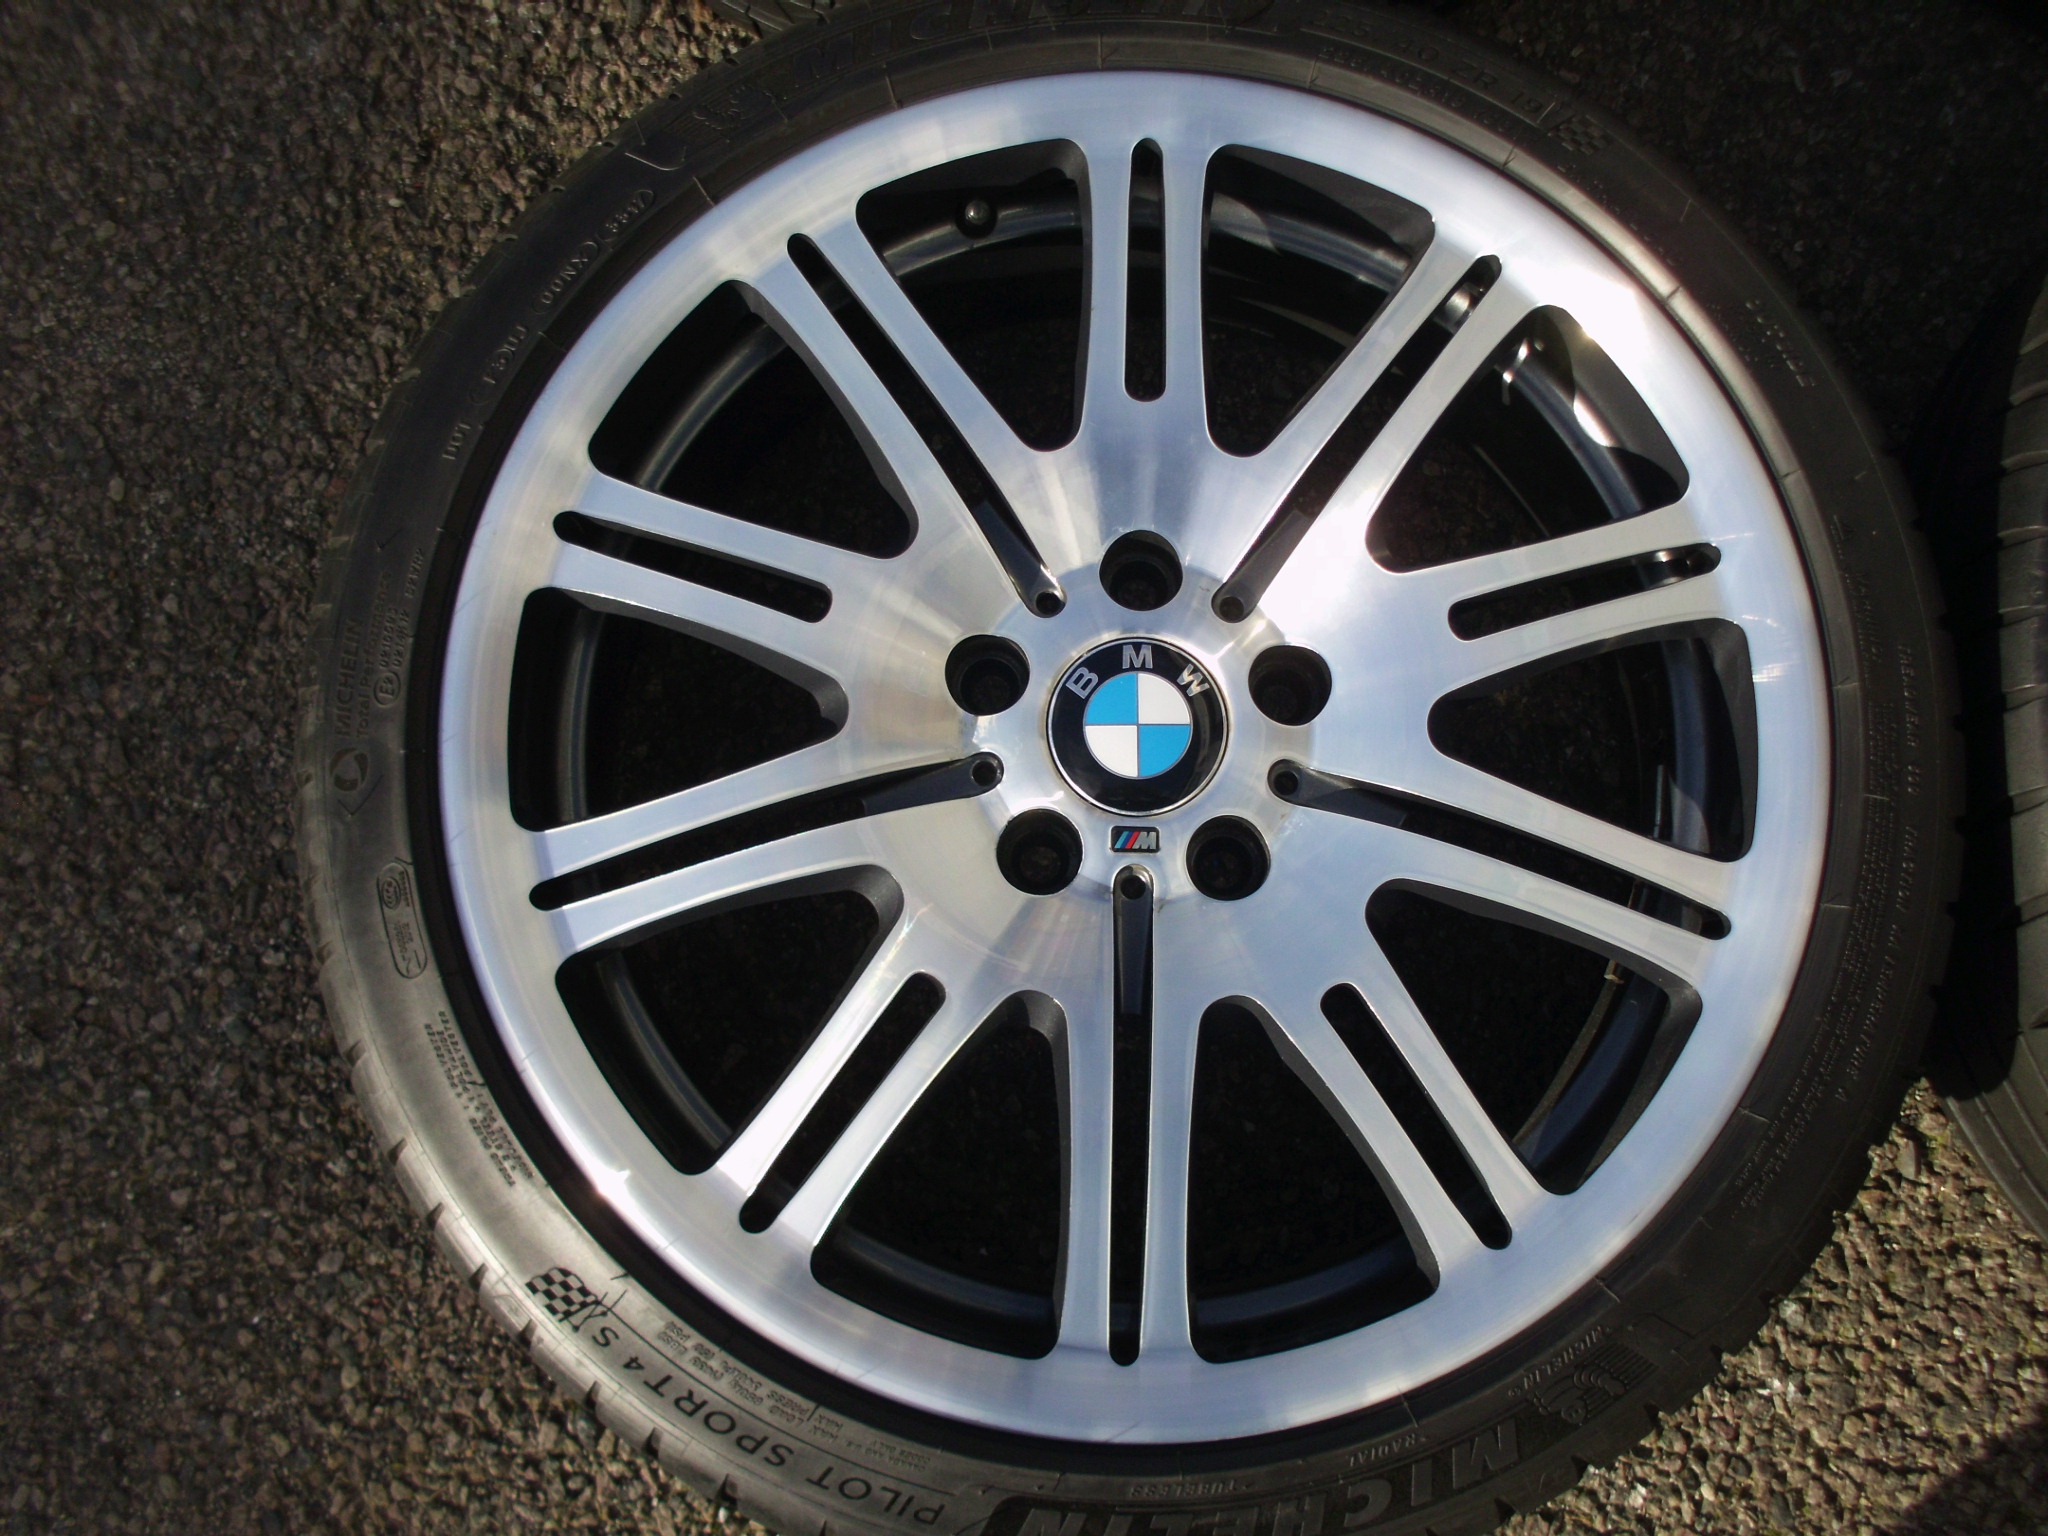 USED 19" GENUINE BMW STYLE 67M FORGED E46 M3 ALLOY WHEELS WIDE REAR, GC INC GOOD TYRES